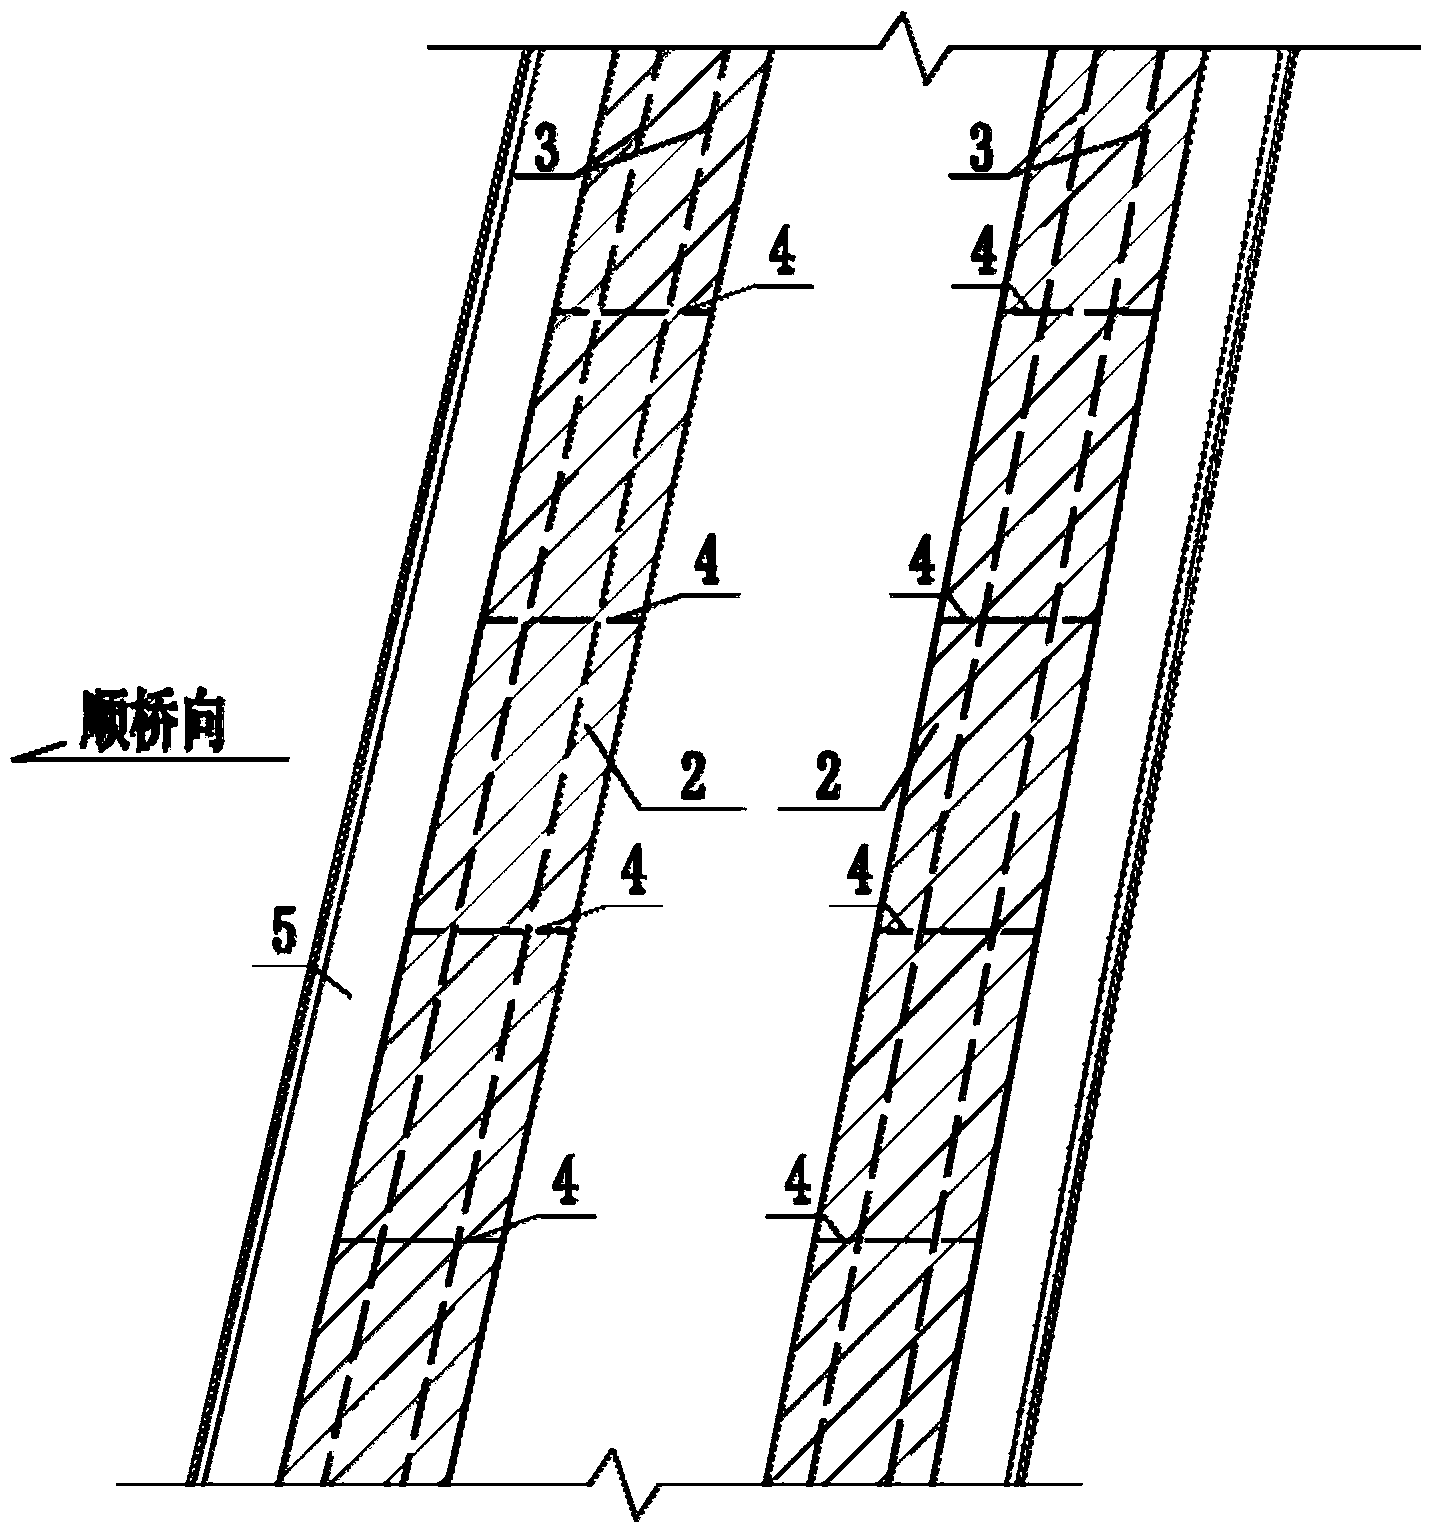 Vortex-induced vibration and galloping control device used for box-shaped section steel tower column